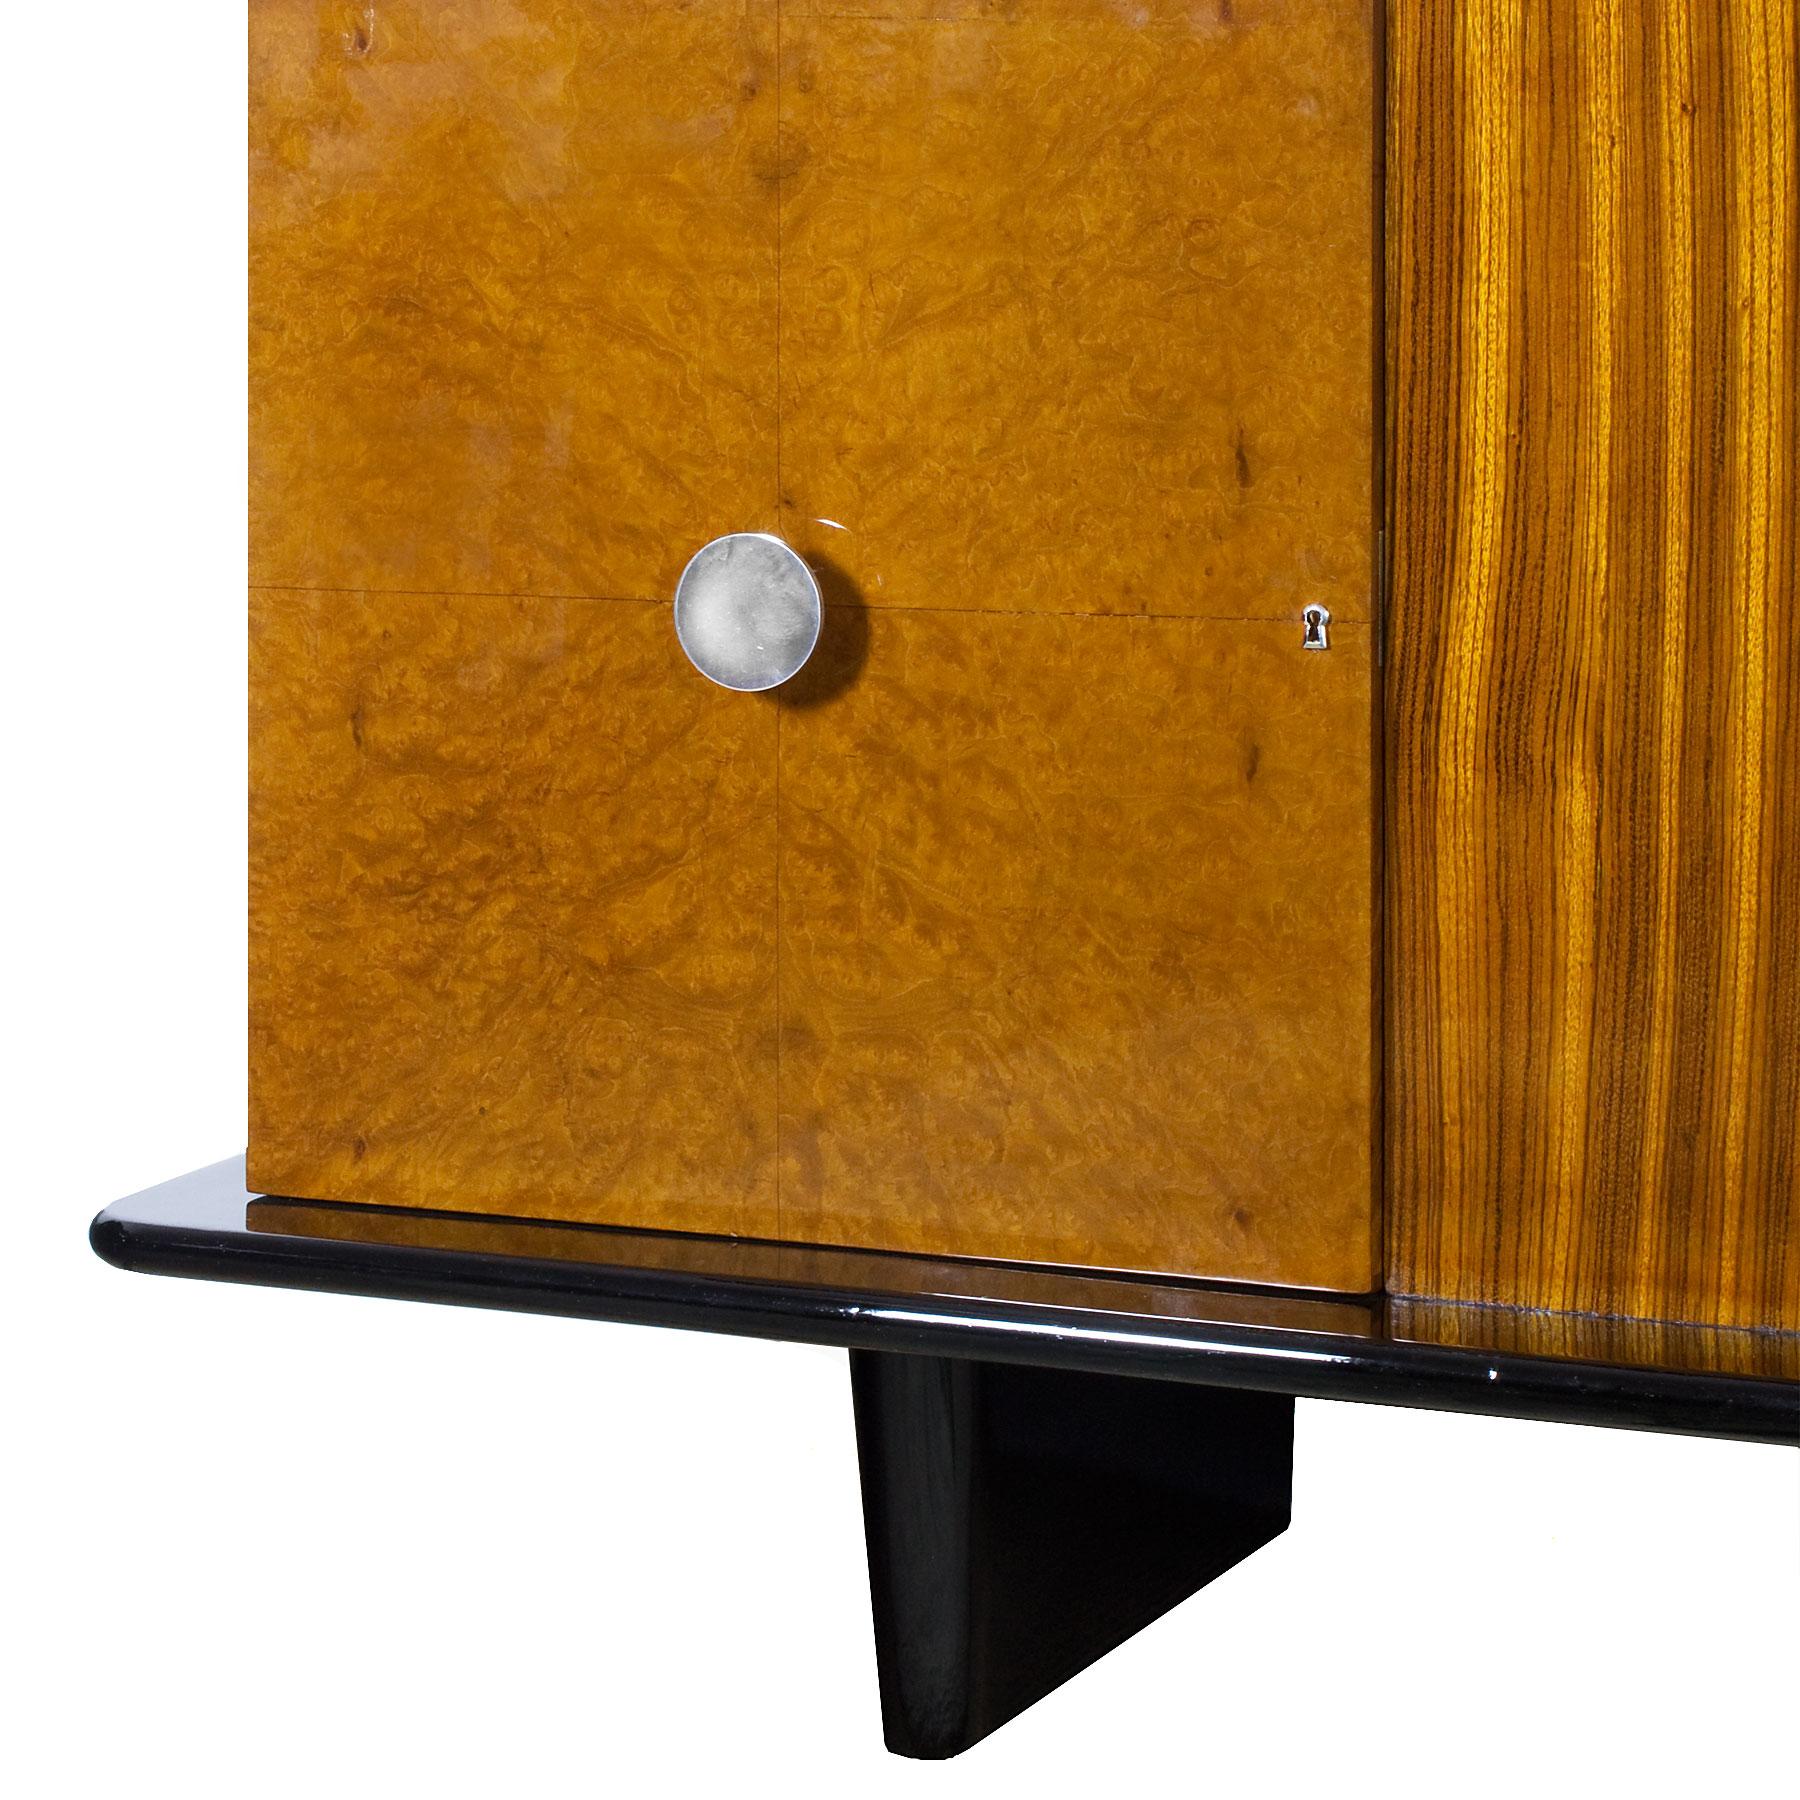 1930s Art Deco Sideboard, Maple, Zebrano, Cherrywood, Black Lacquer - Italy For Sale 1